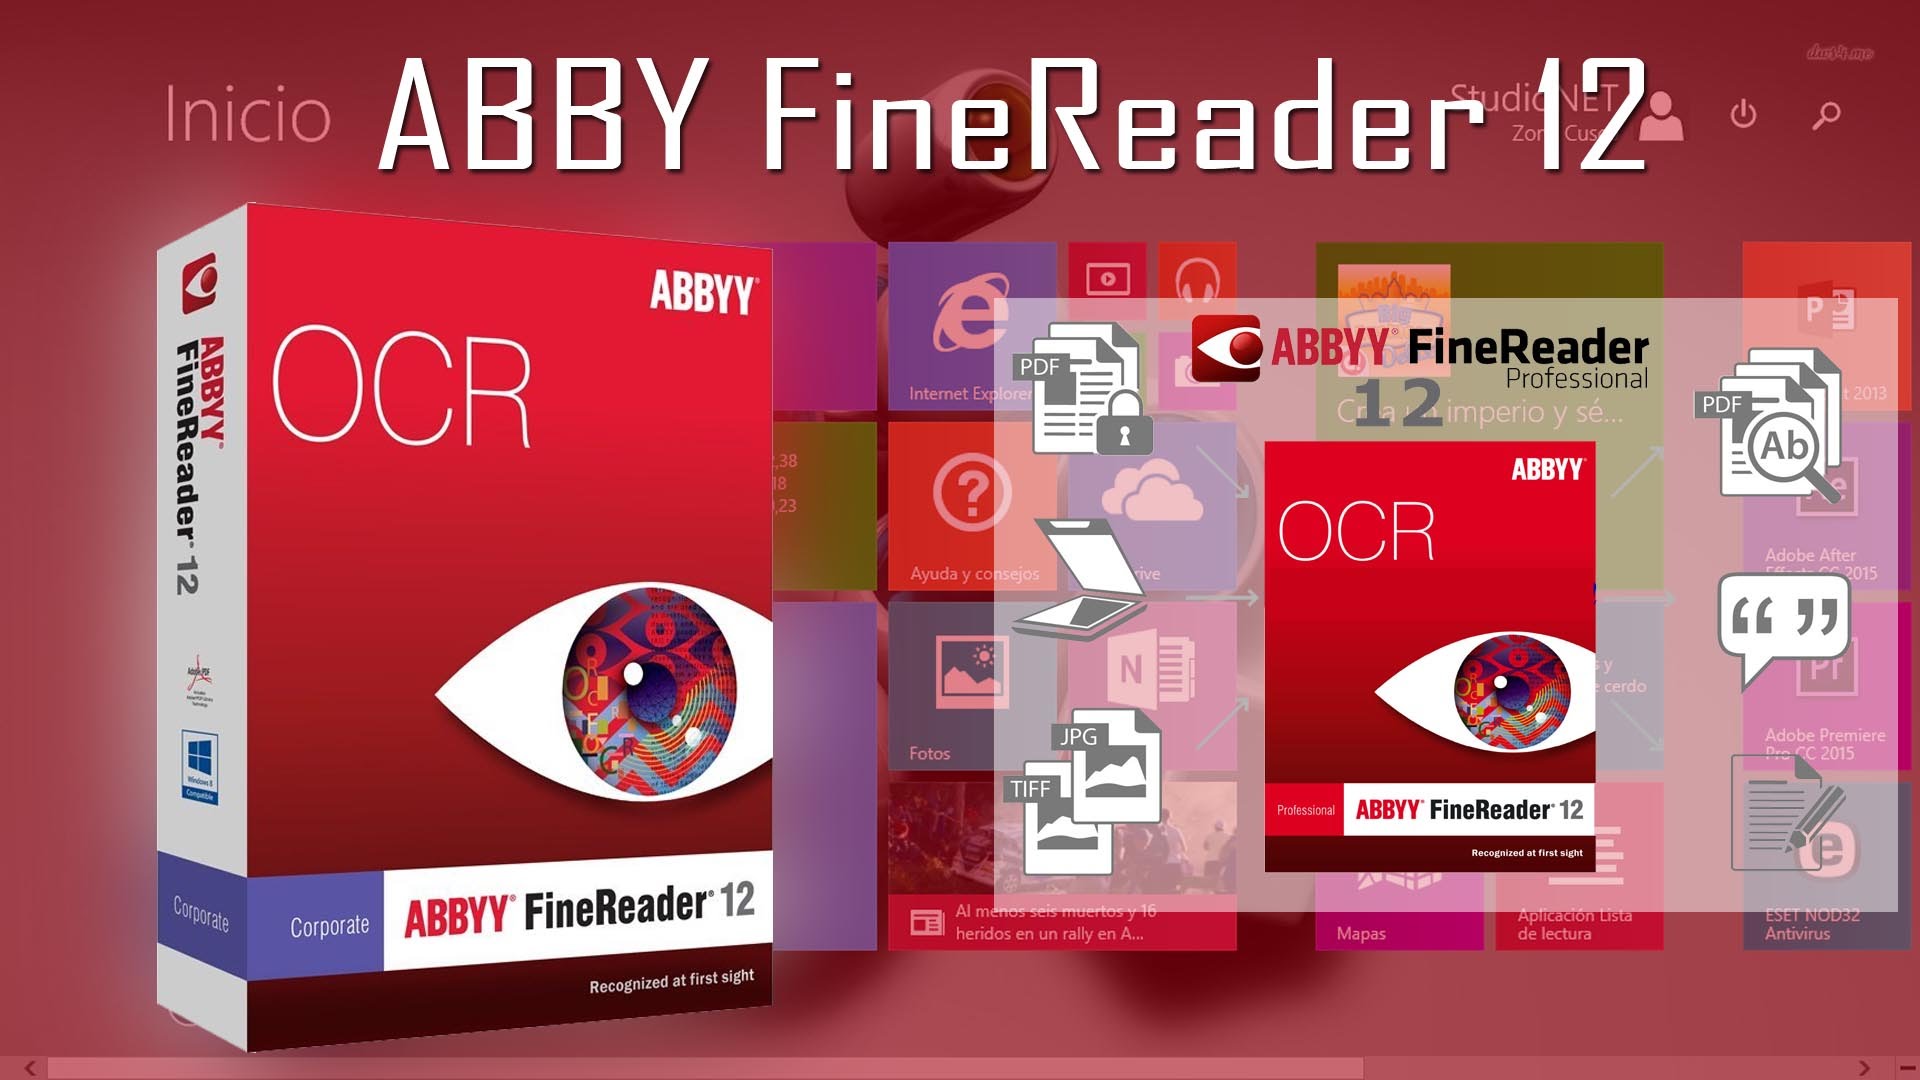 abby fine reader crack free download